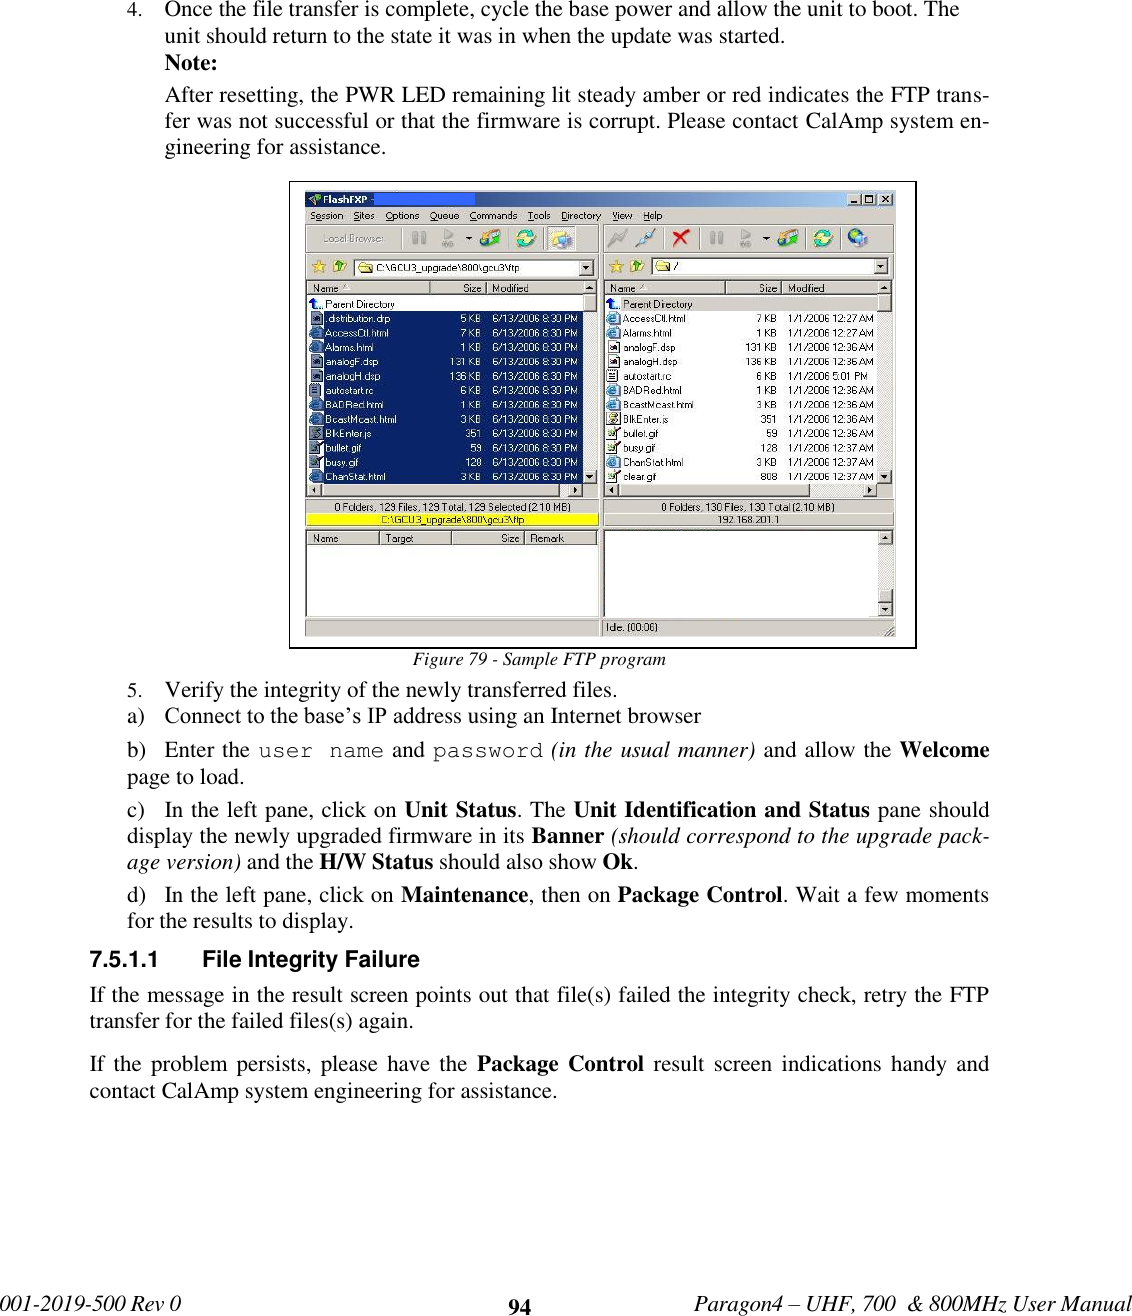             001-2019-500 Rev 0   Paragon4 – UHF, 700  &amp; 800MHz User Manual     94 4. Once the file transfer is complete, cycle the base power and allow the unit to boot. The unit should return to the state it was in when the update was started.  Note: After resetting, the PWR LED remaining lit steady amber or red indicates the FTP trans-fer was not successful or that the firmware is corrupt. Please contact CalAmp system en-gineering for assistance. Figure 79 - Sample FTP program 5. Verify the integrity of the newly transferred files.  a) Connect to the base’s IP address using an Internet browser  b) Enter the user name and password (in the usual manner) and allow the Welcome page to load.  c) In the left pane, click on Unit Status. The Unit Identification and Status pane should display the newly upgraded firmware in its Banner (should correspond to the upgrade pack-age version) and the H/W Status should also show Ok. d) In the left pane, click on Maintenance, then on Package Control. Wait a few moments for the results to display.  7.5.1.1  File Integrity Failure If the message in the result screen points out that file(s) failed the integrity check, retry the FTP transfer for the failed files(s) again.  If the  problem persists, please have the  Package Control result screen  indications handy  and contact CalAmp system engineering for assistance.       